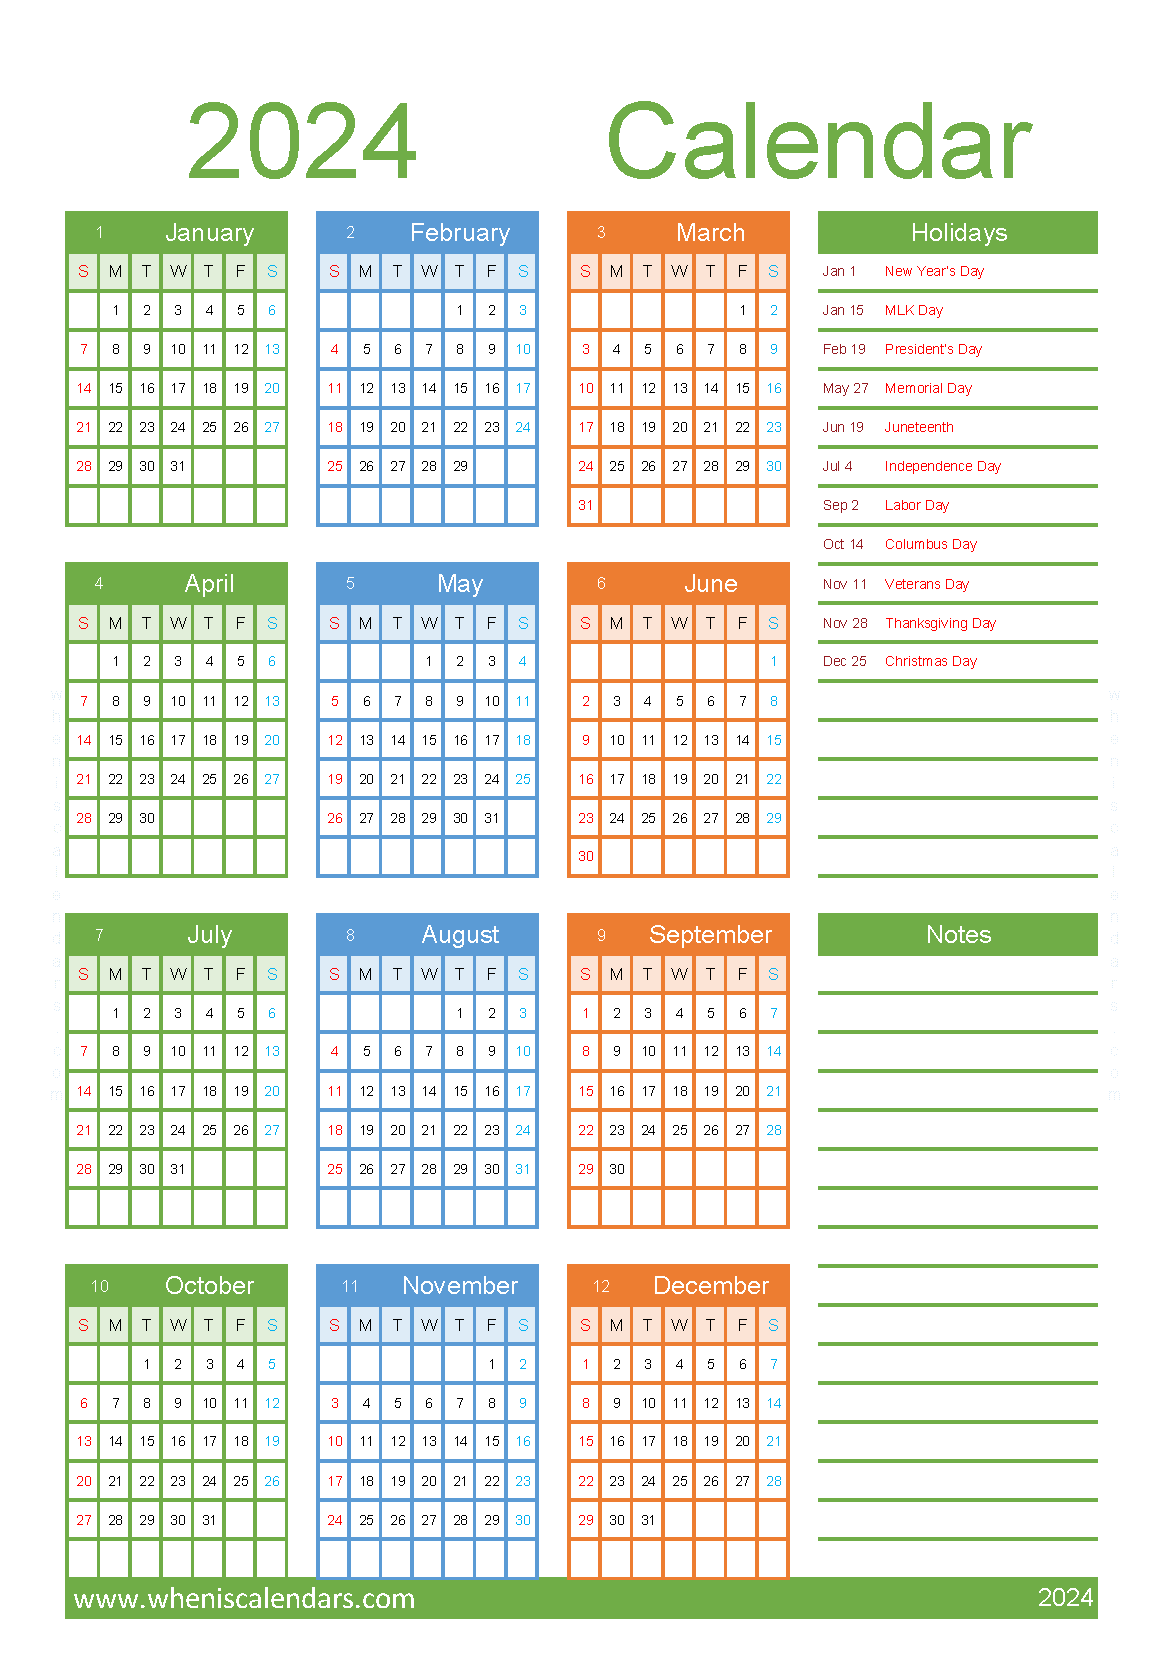 Free printable 2024 Calendar with Holidays A5 in vertical portrait